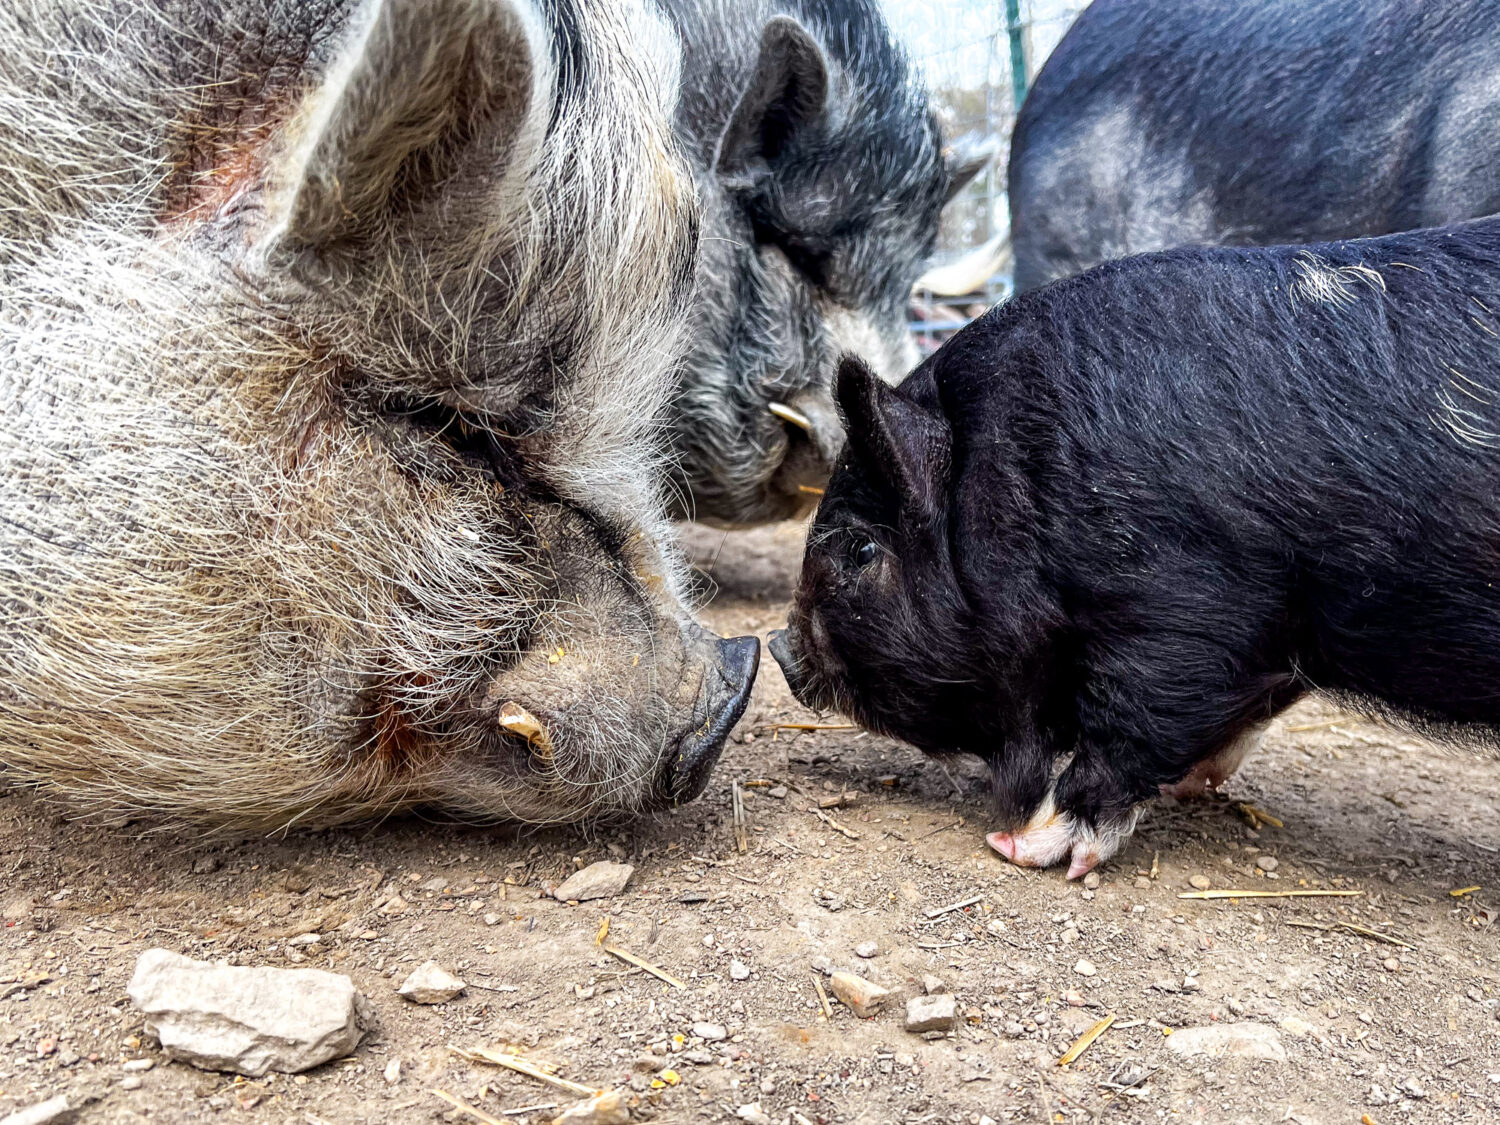 Jimmy the pig says hello to Columbo the piglet.